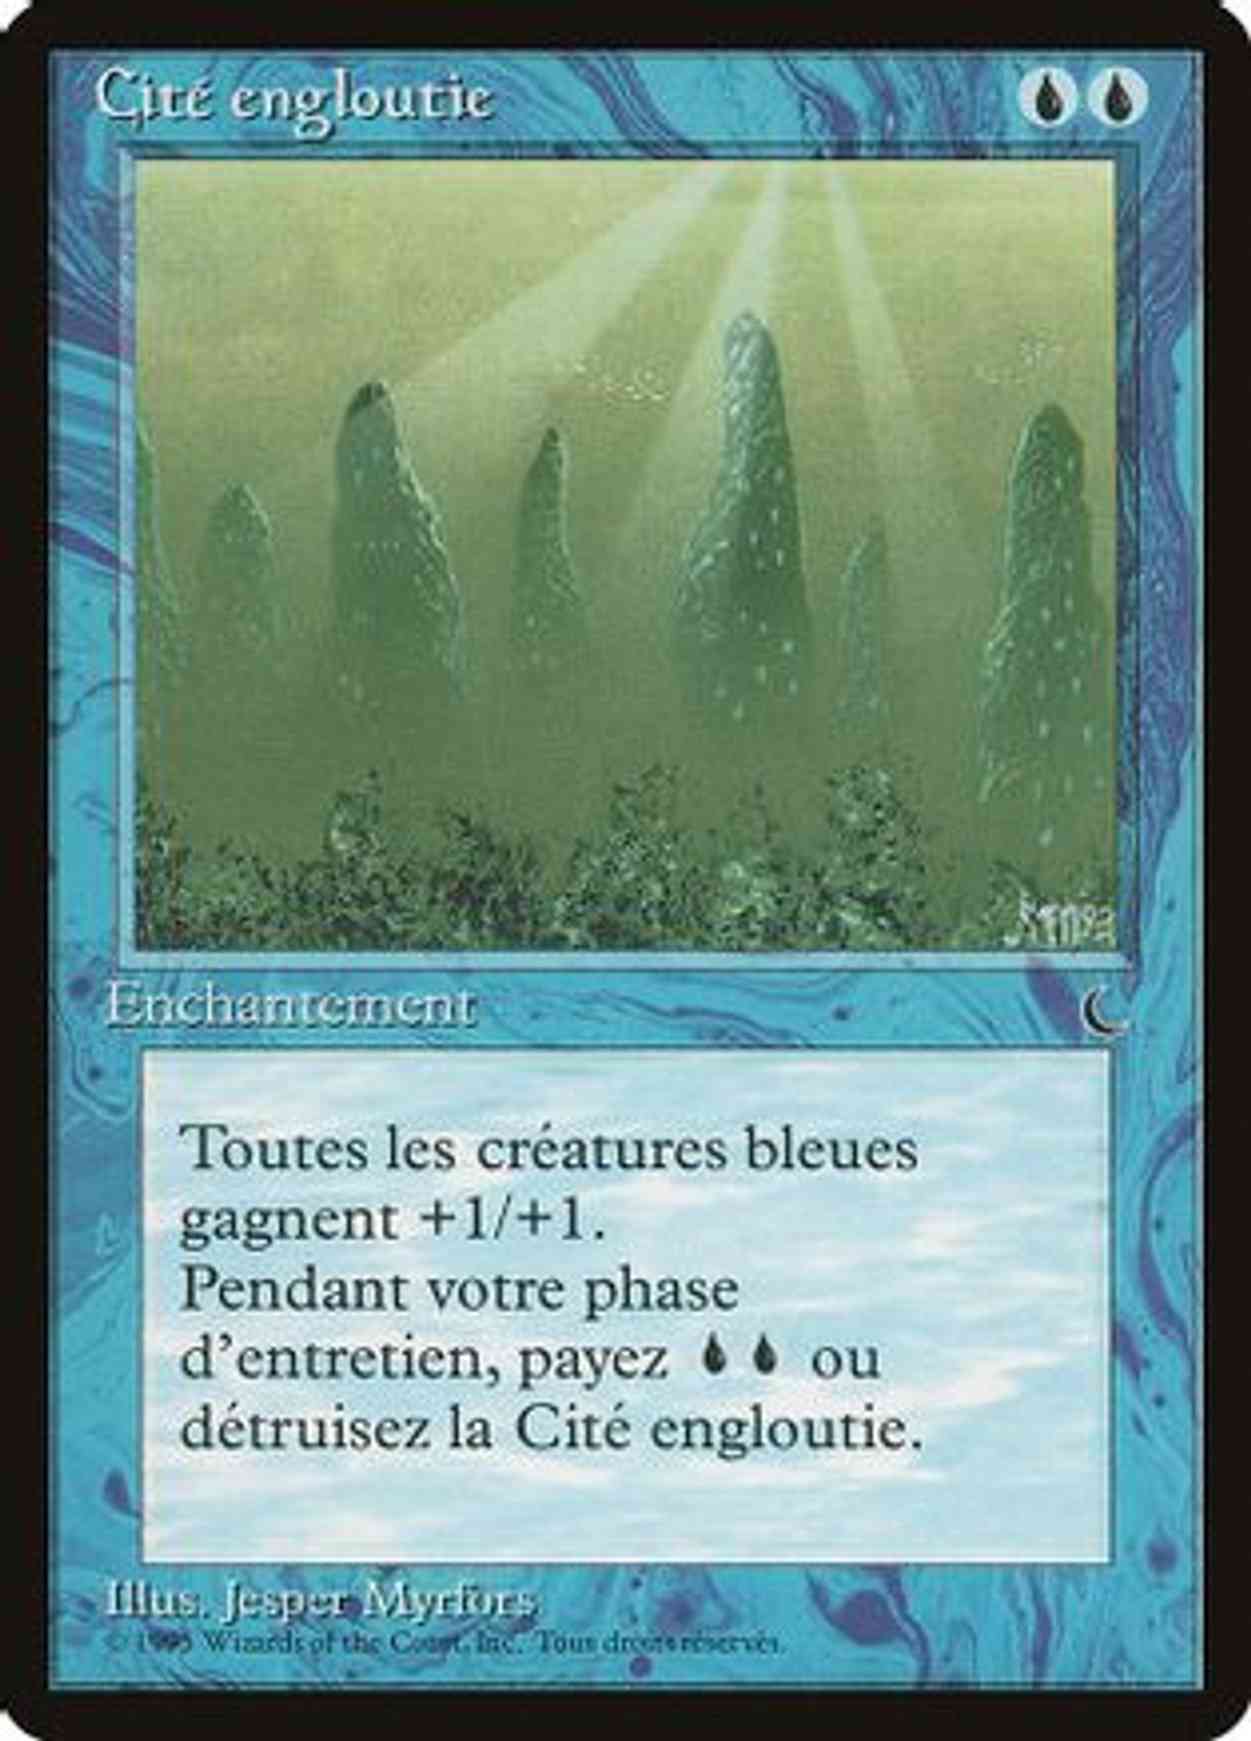 Sunken City (French) - "Cite engloutie" magic card front